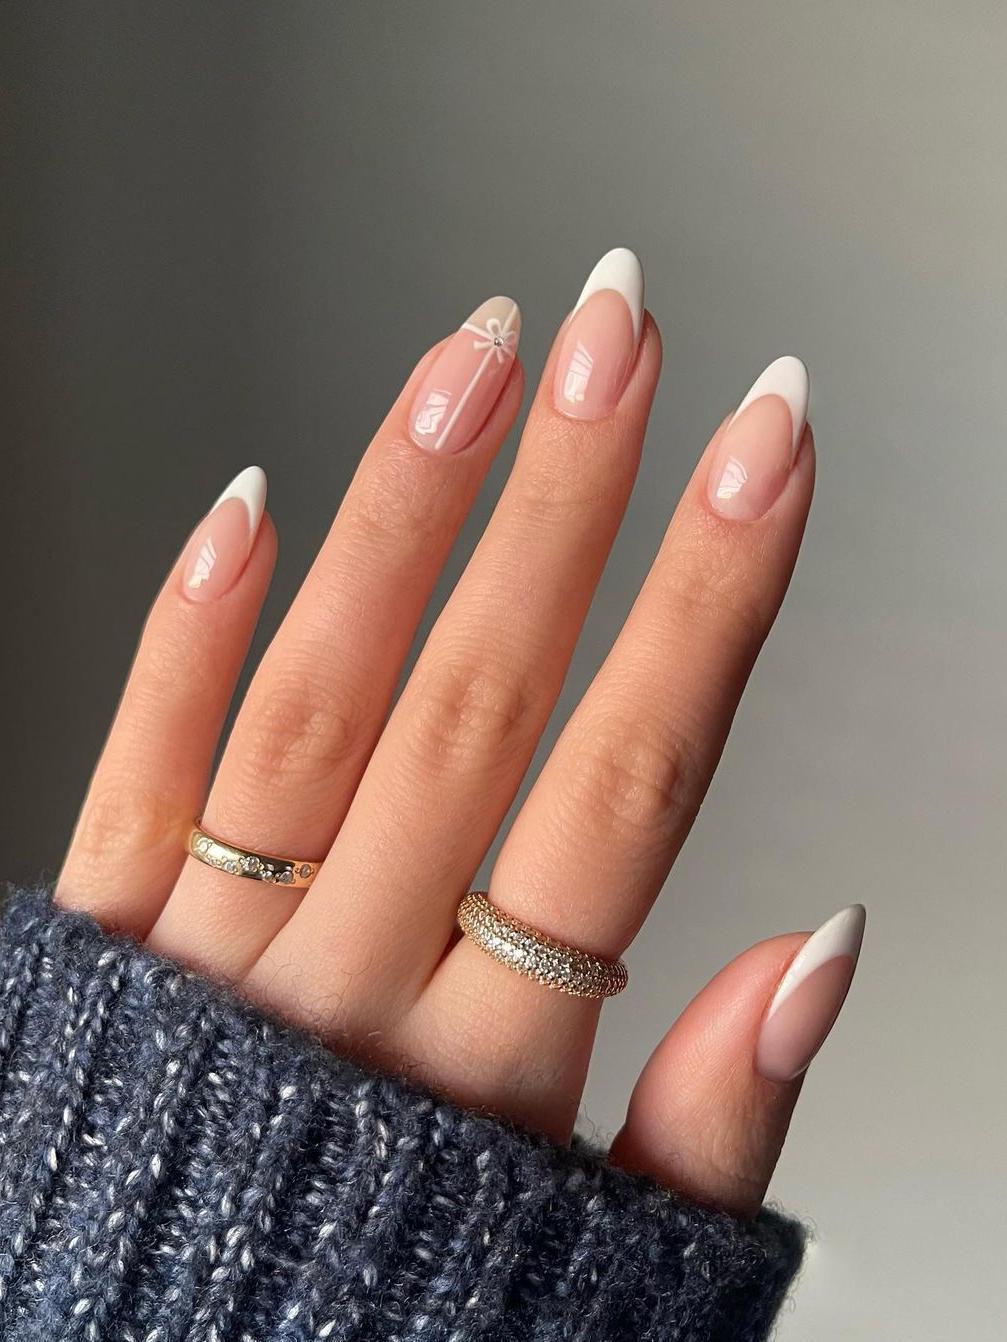 The 25 Best Wedding Nail Ideas For Brides, From Simple To So Extra